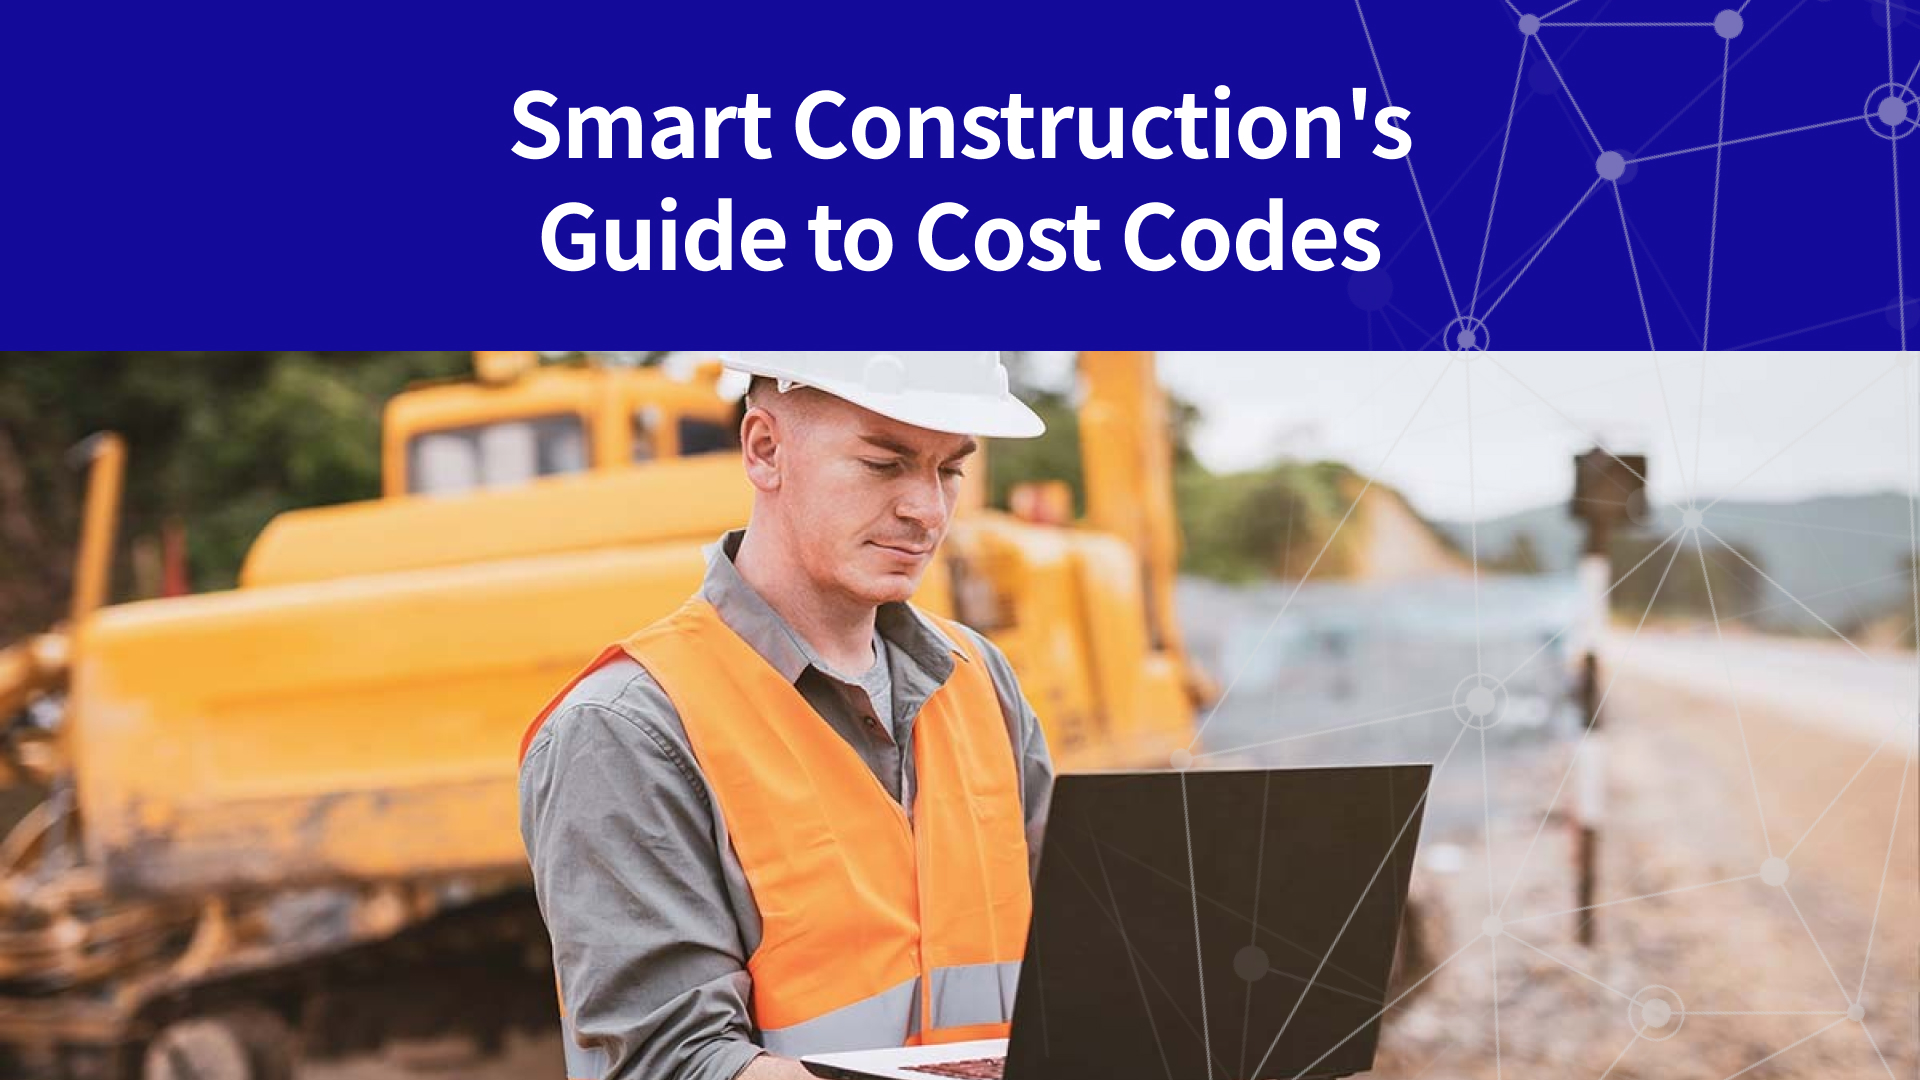 Smart Construction's Guide to Cost Codes